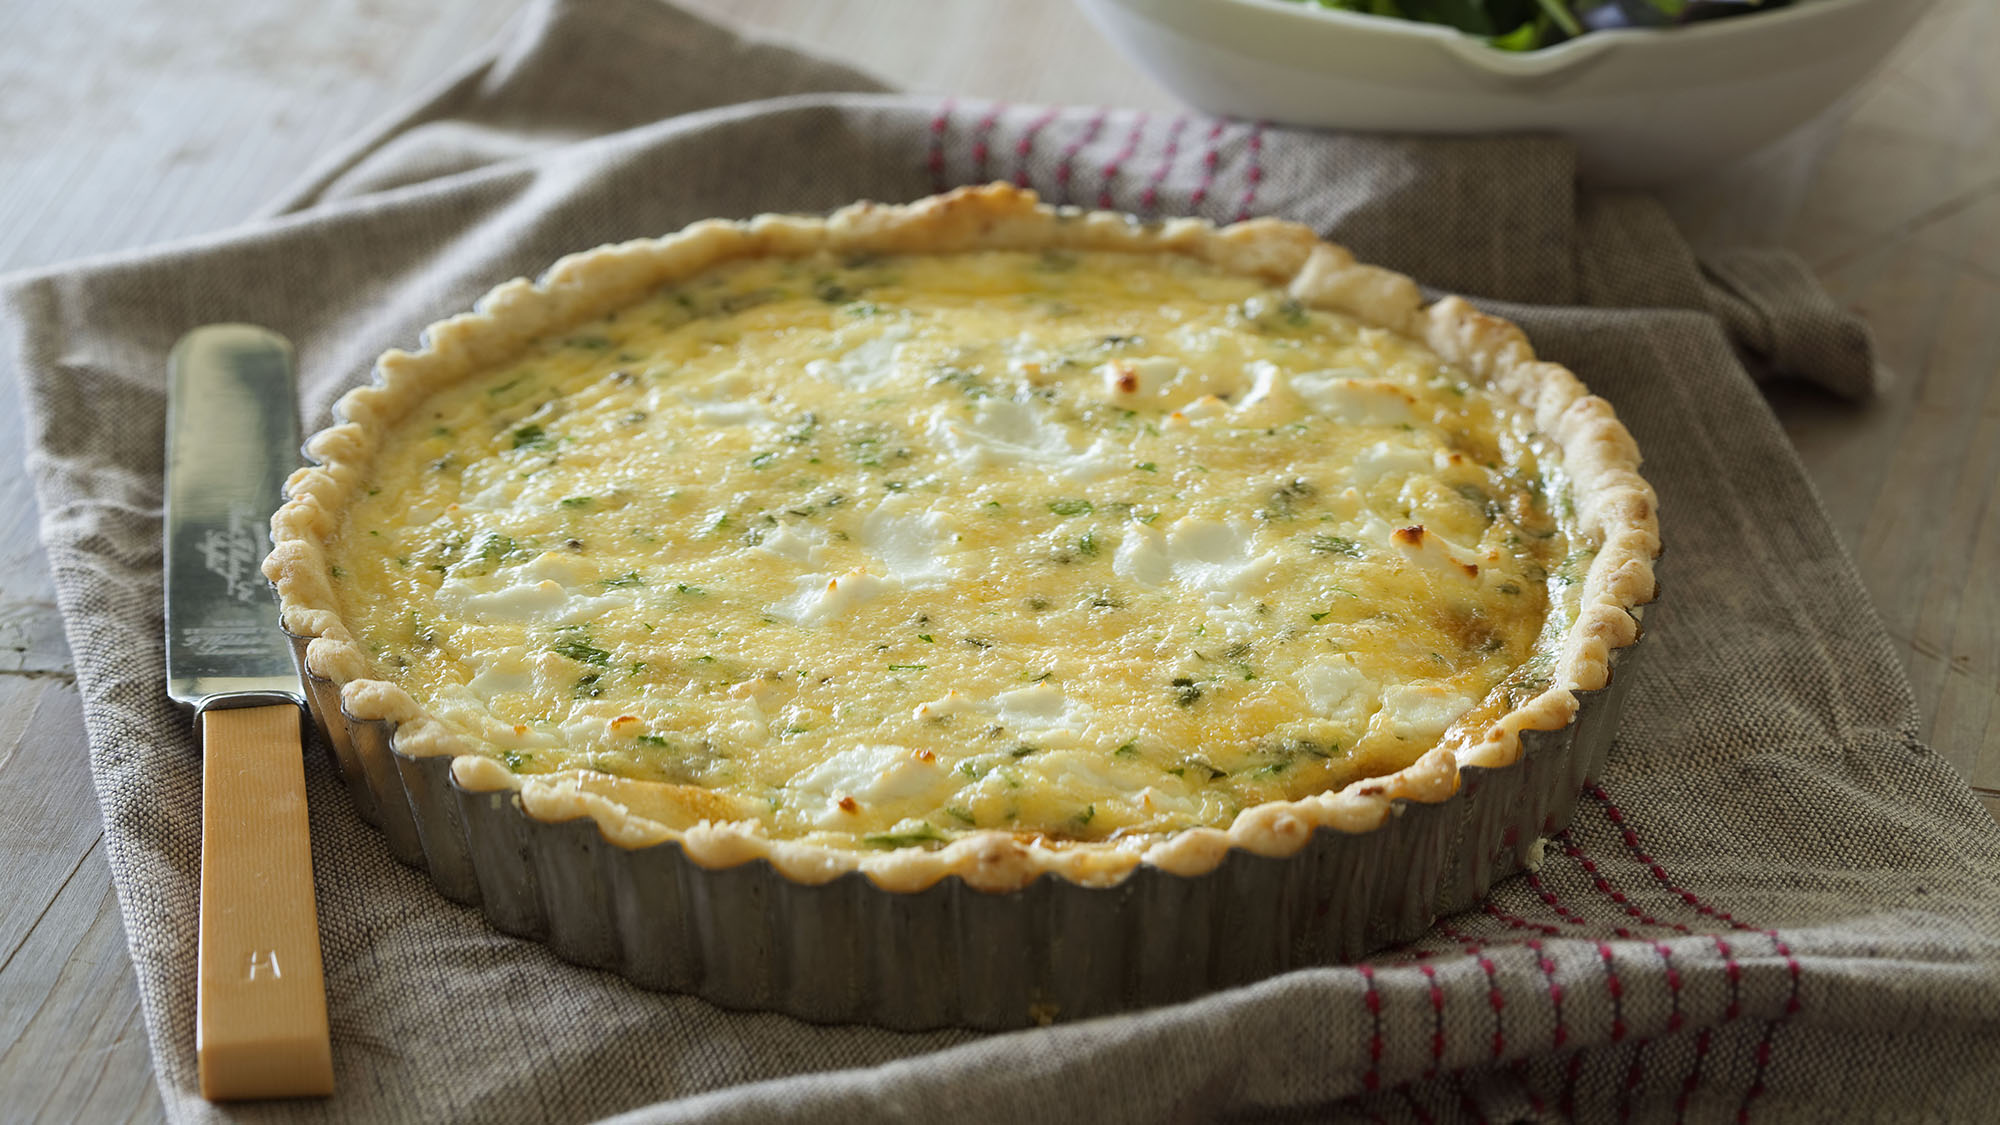 Goats cheese and herb tart | OverSixty